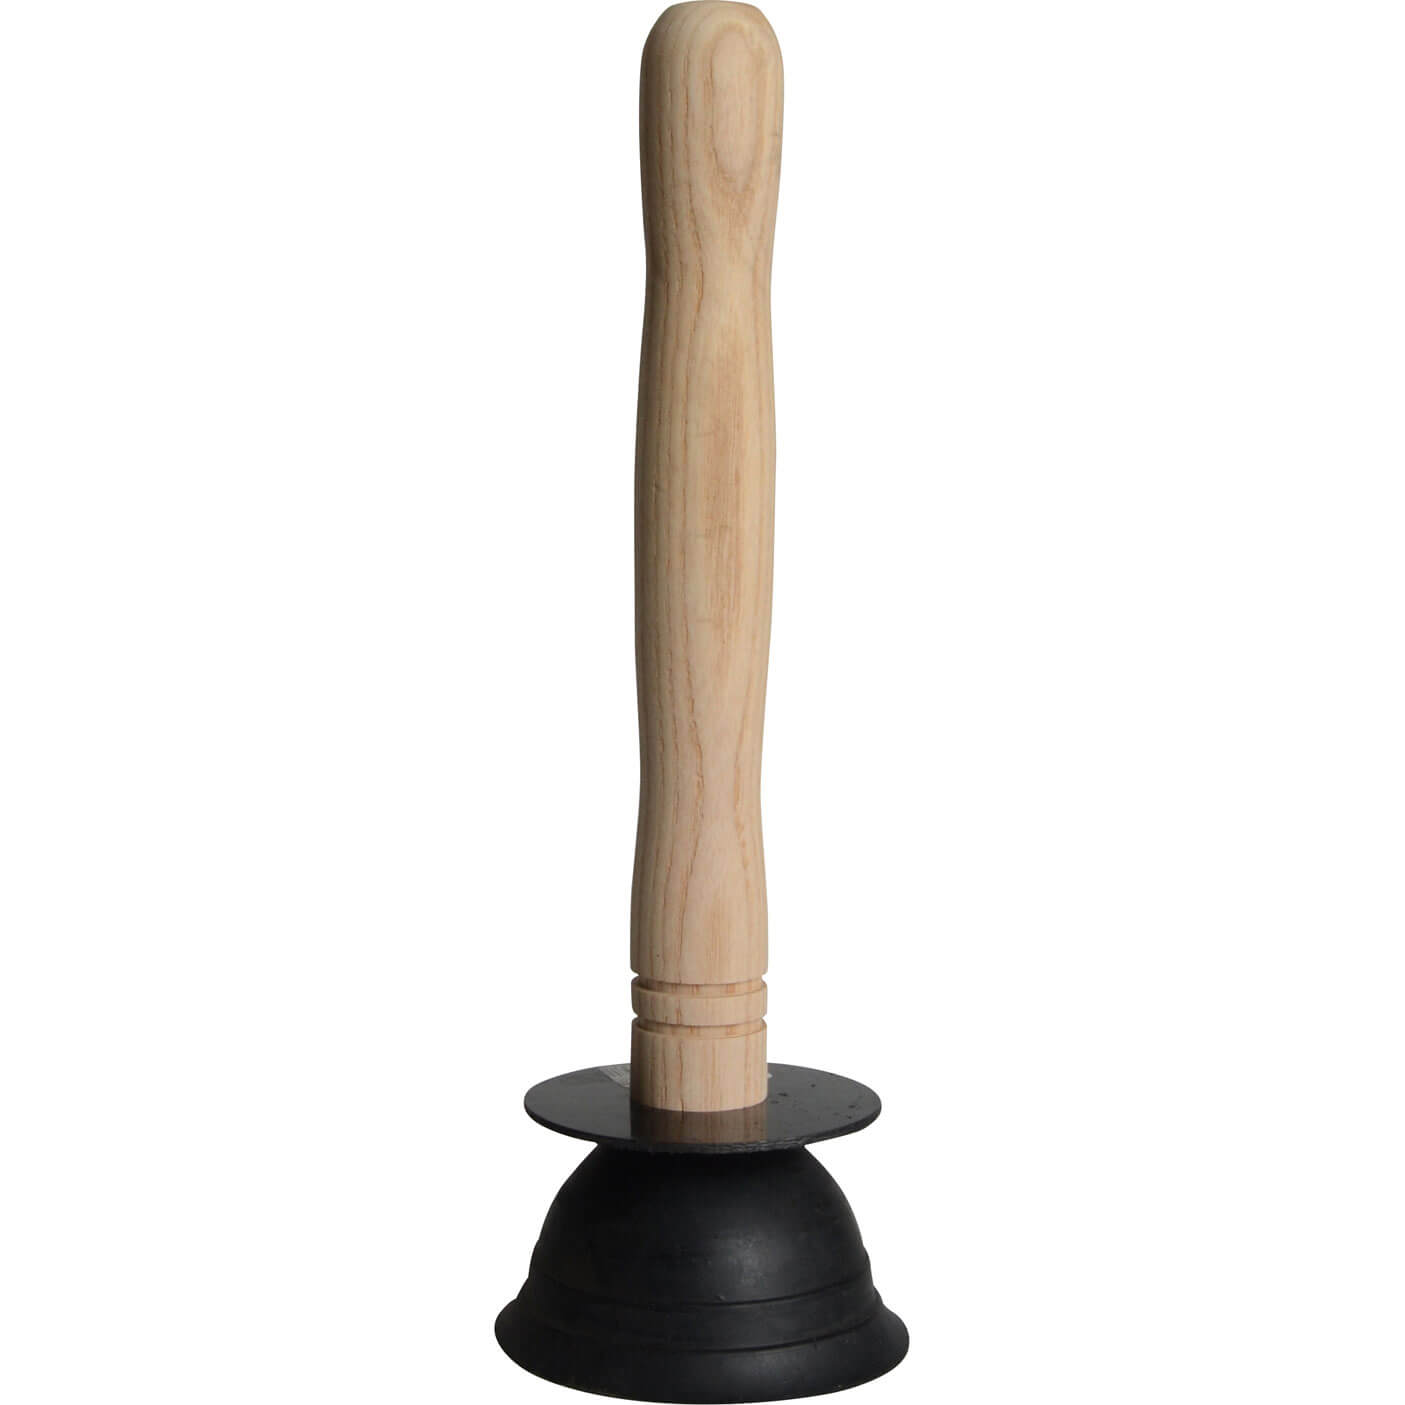 Image of Monument Force Sink Plunger 100mm